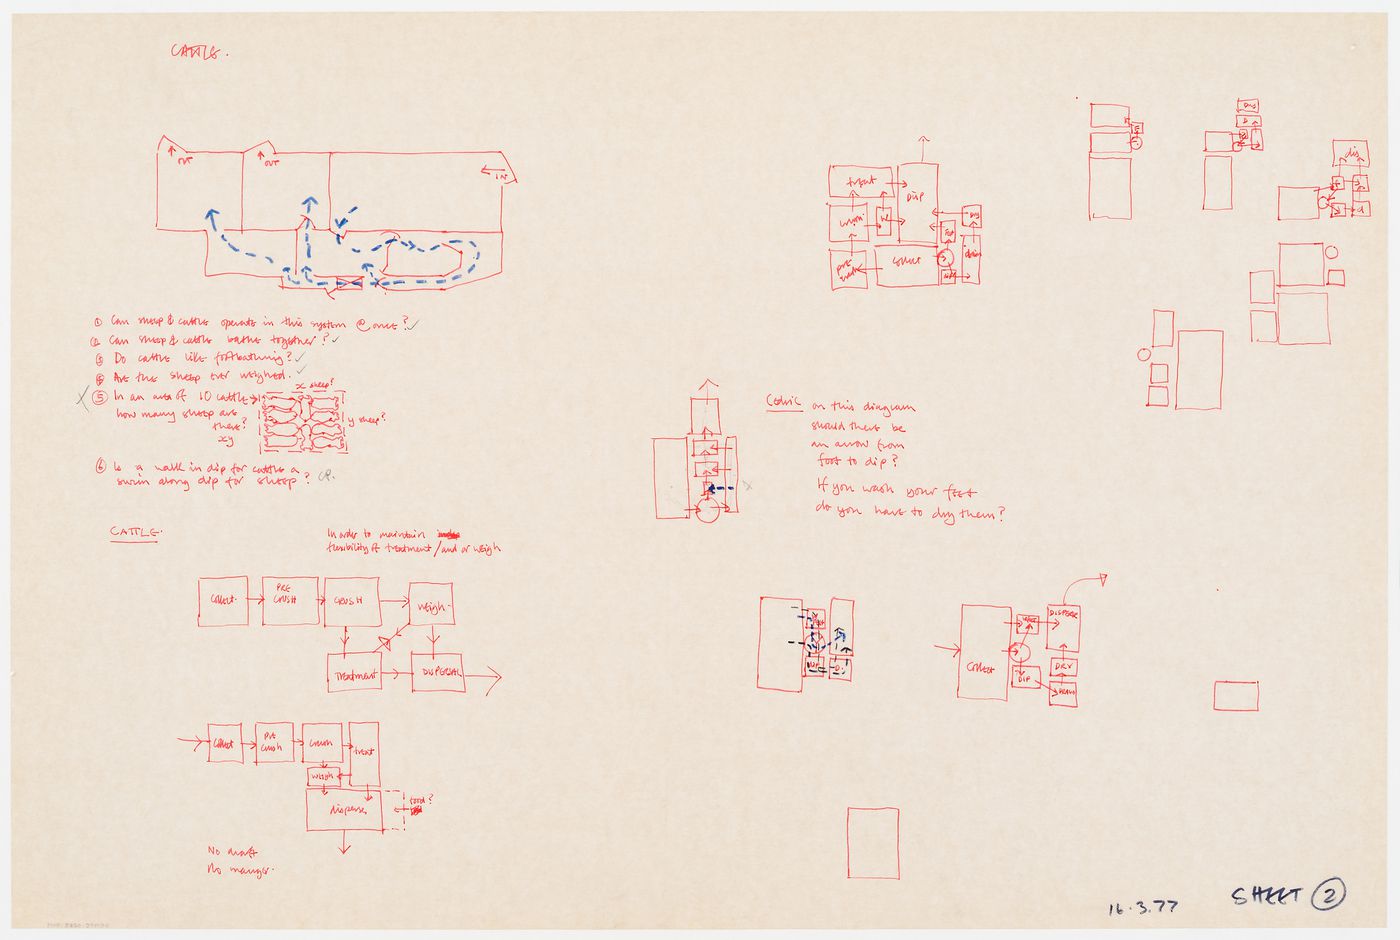 Plan and diagrams for a livestock pen (document from Westpen project records)